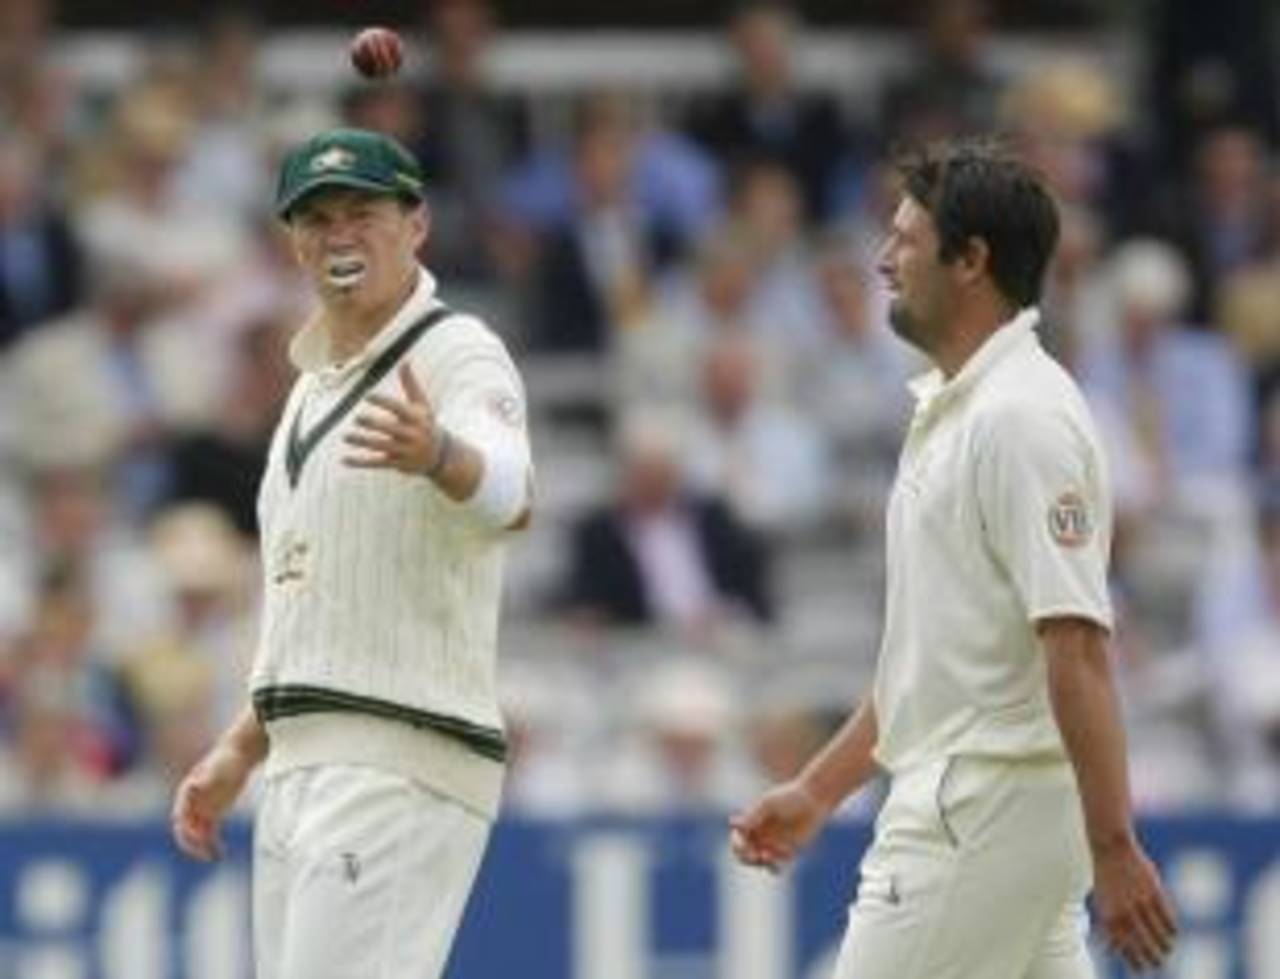 Peter Siddle tosses the ball to Ben Hilfenhaus, England v Australia, 2nd Test, Lord's, 1st day, July 16, 2009